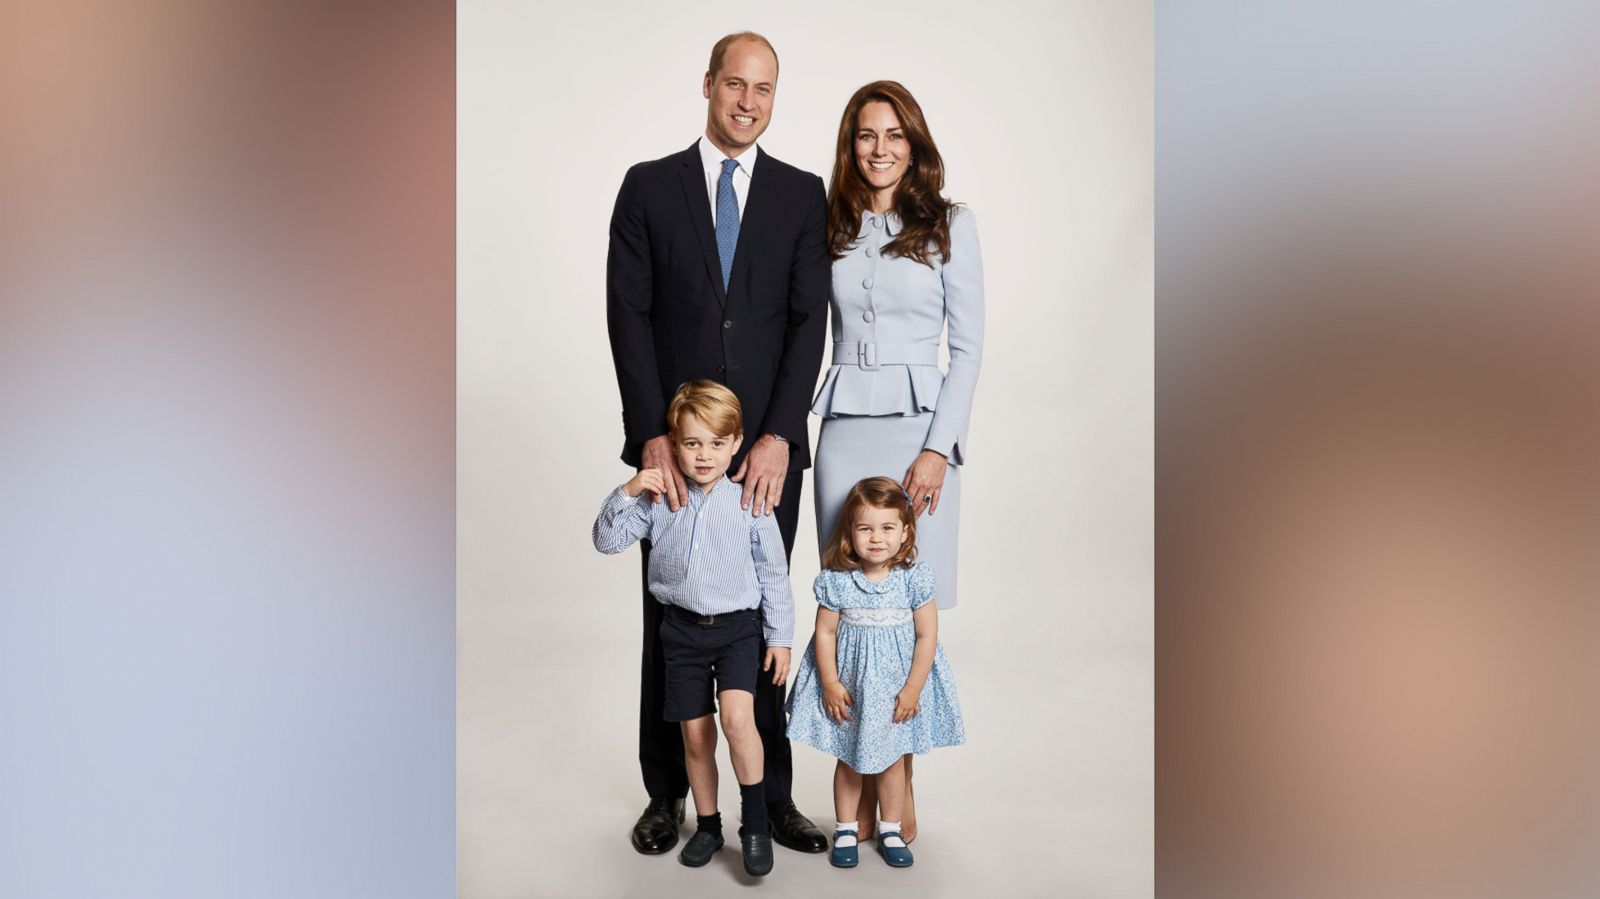 ROXANNE💮 on Twitter  Princess charlotte, Prince william family